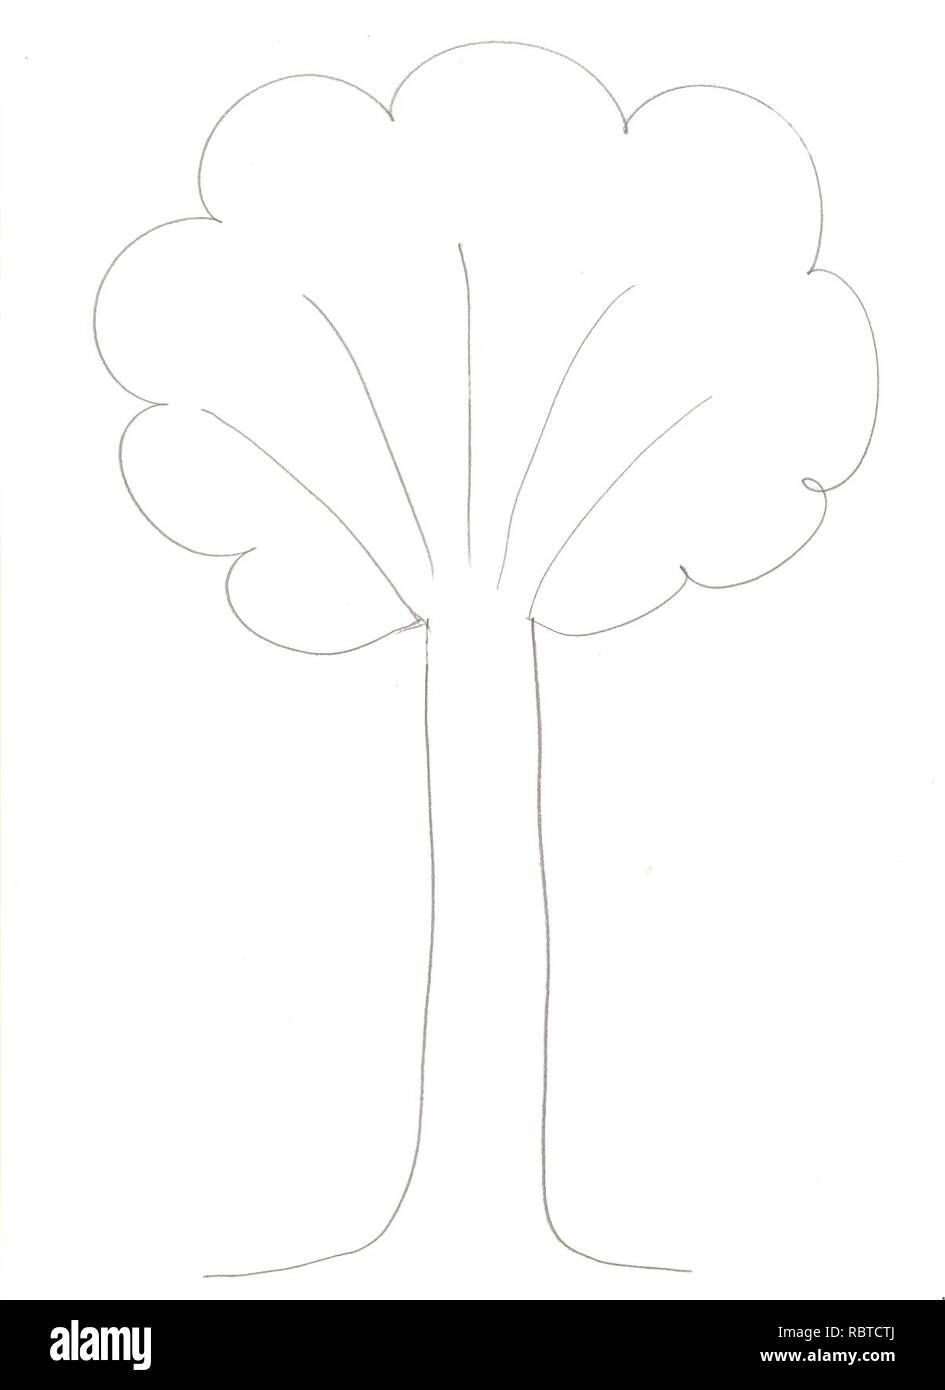 A tree - illustration for House-Tree-Person Test Stock Photo - Alamy